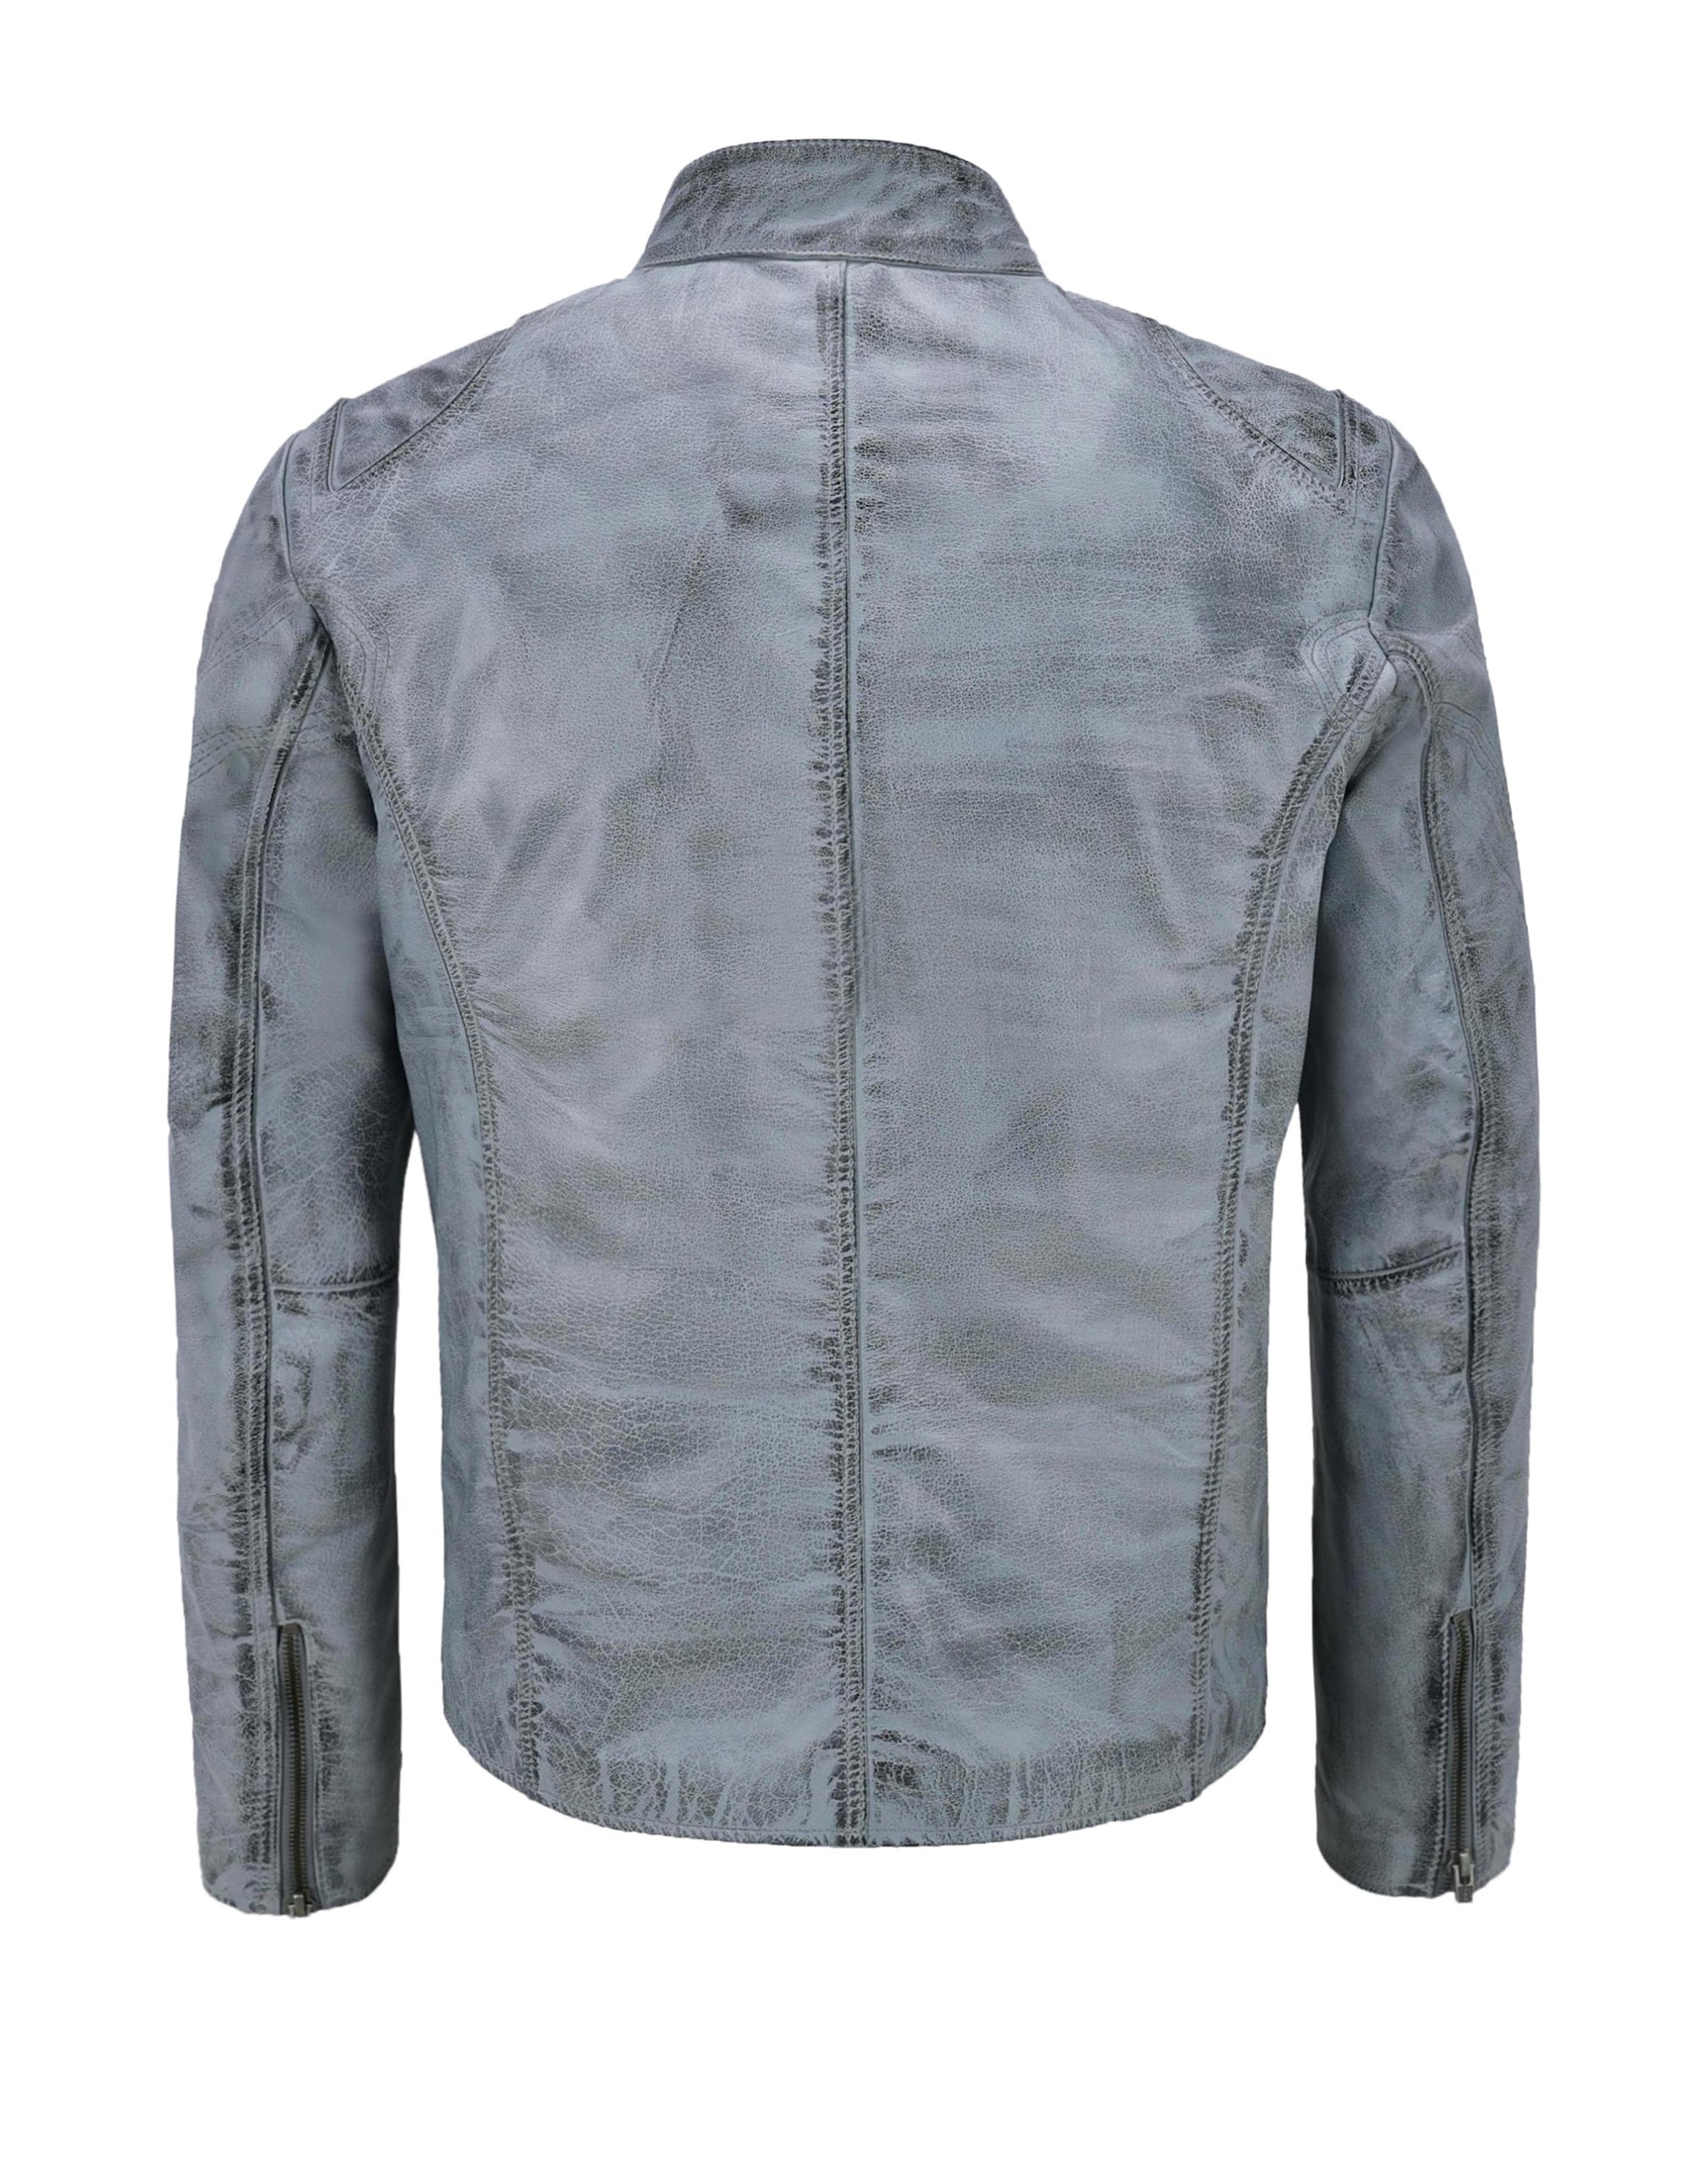 Distress White Leather Jackets For Men